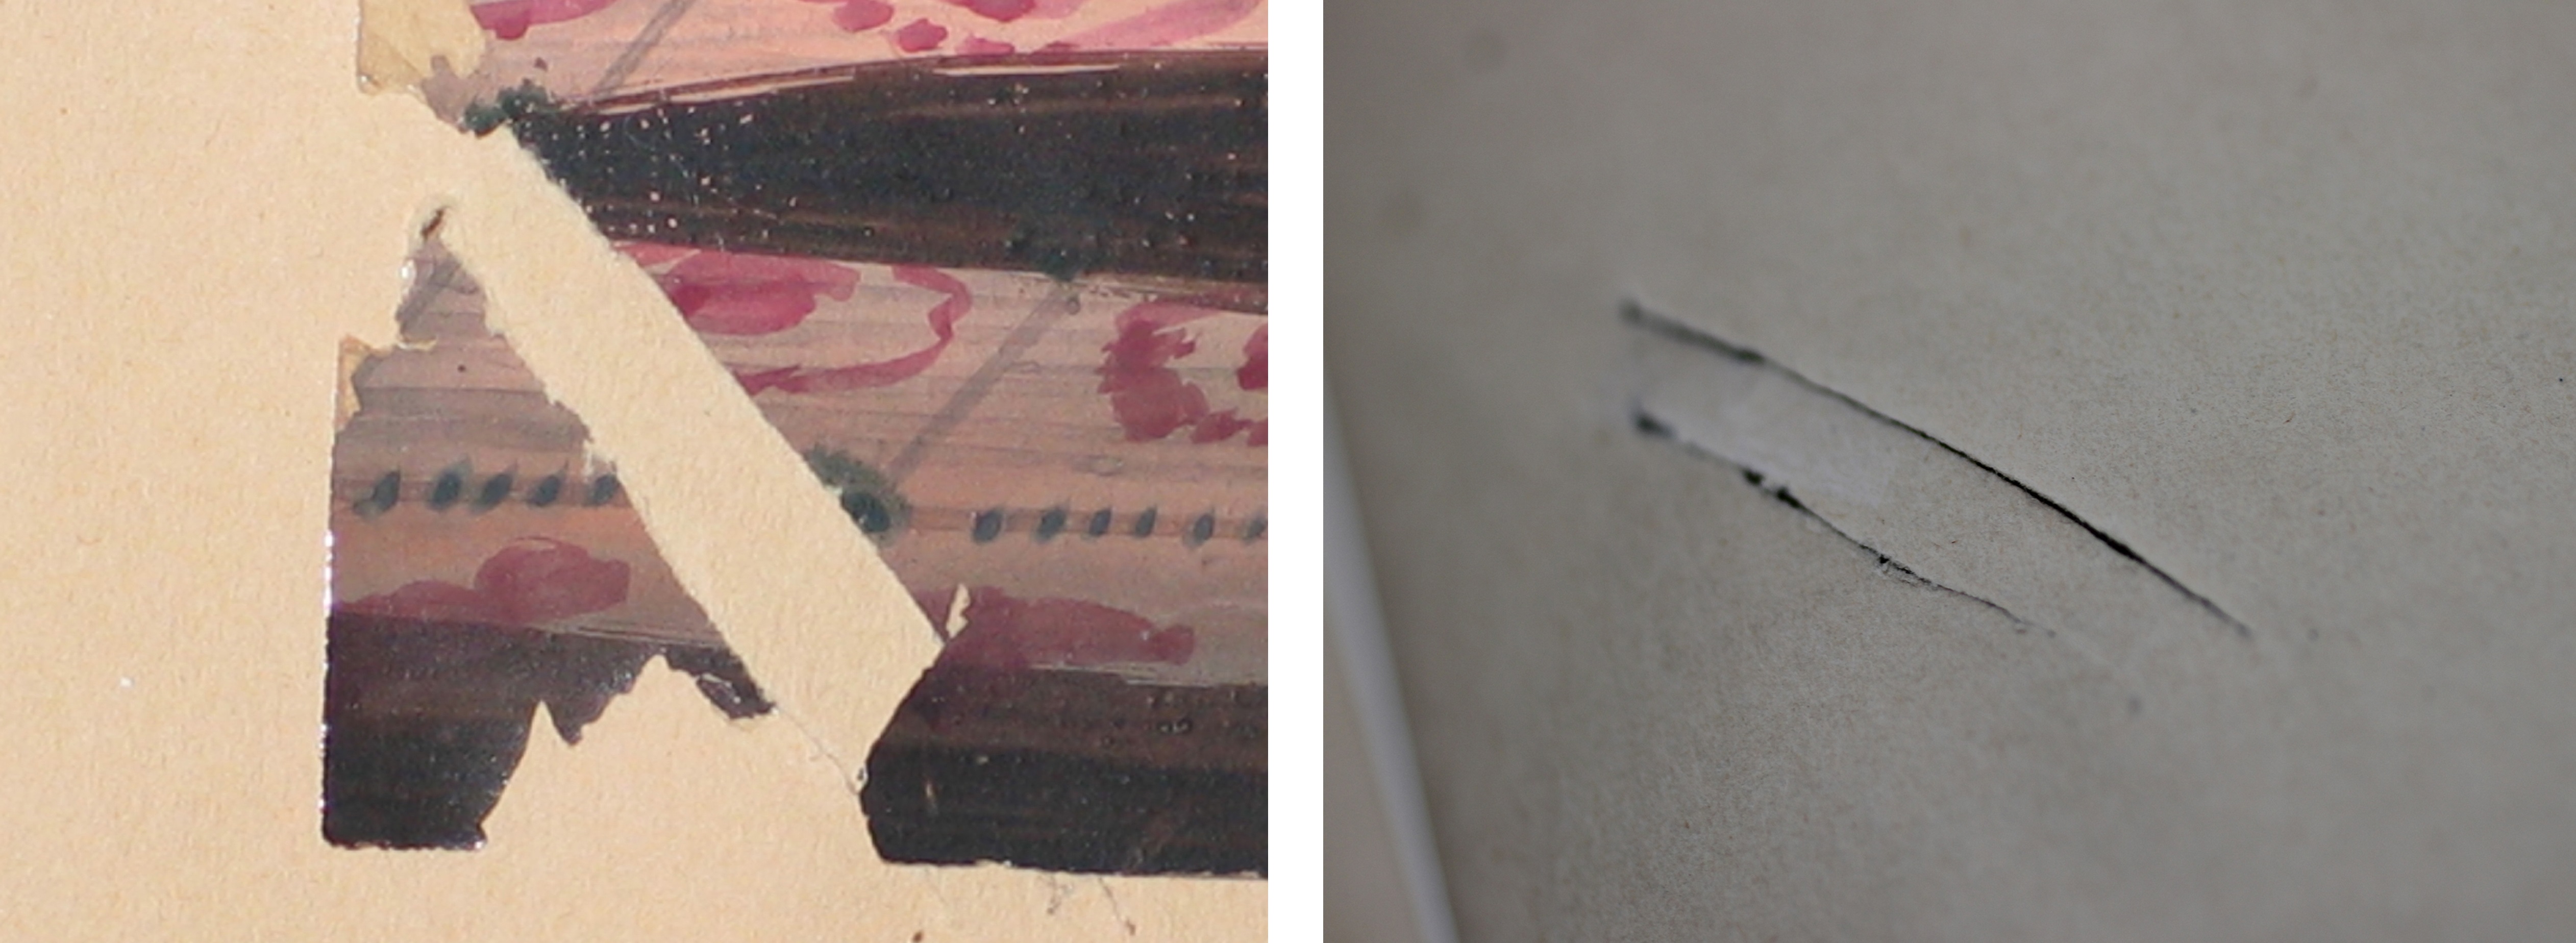 (L) Detail of corner damage caused by paper slits (R) Detail of paper slit in album page